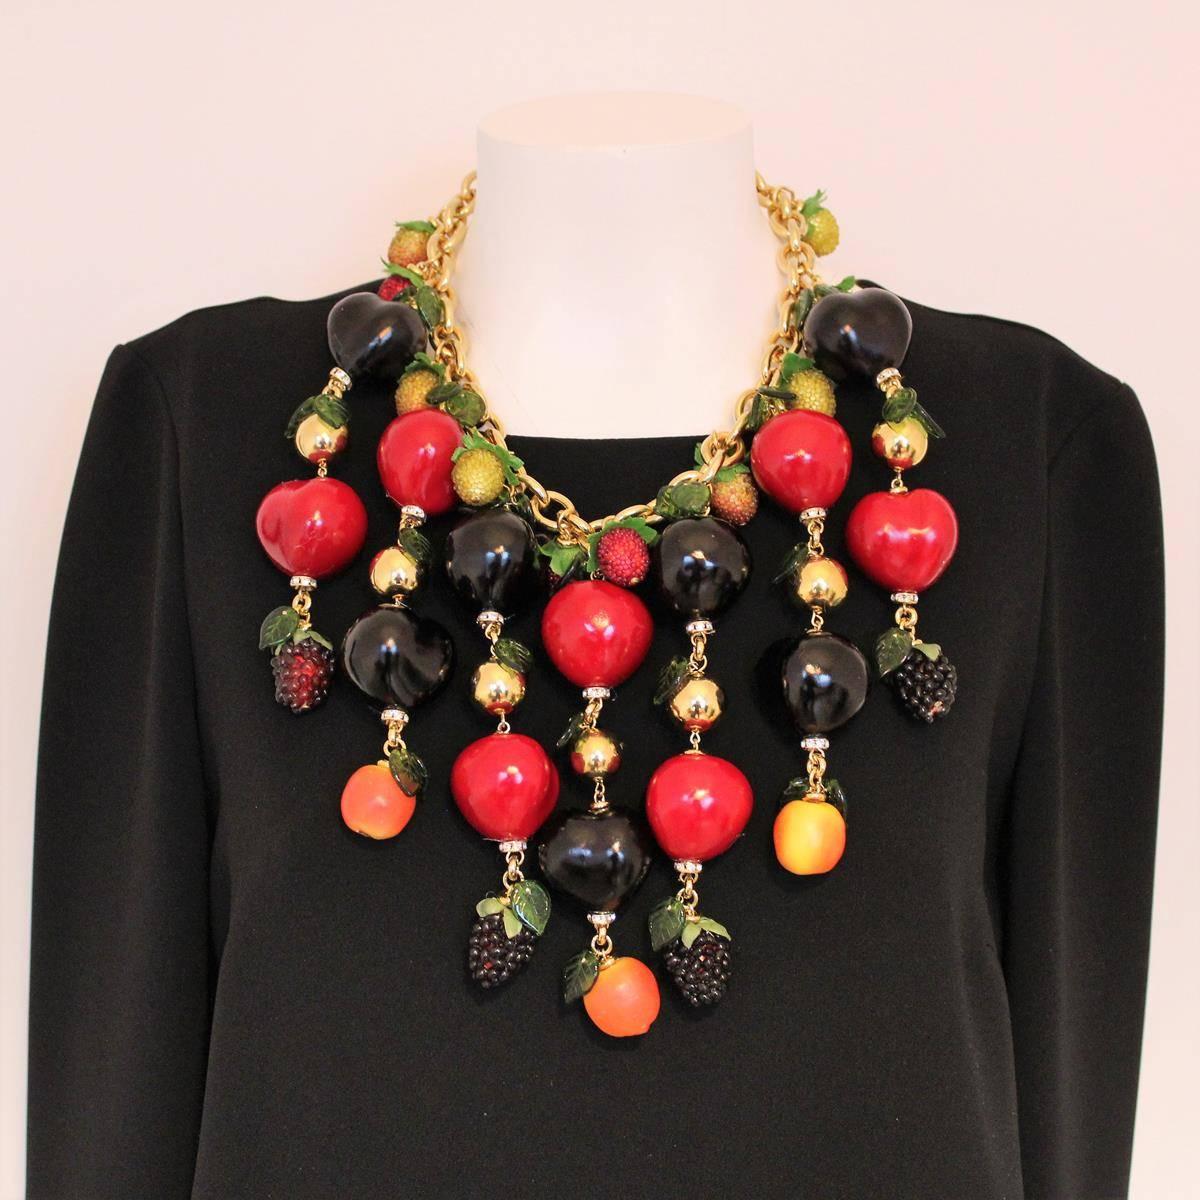 Fantastic masterpiece by Carlo Zini
One of the world greatest bijoux designers
Large collier
Stunning construction of fruits elements linked in golden chain and adorned with swarovski 
crystals
Multicolored and joyful fruits
Non allergenic metal,